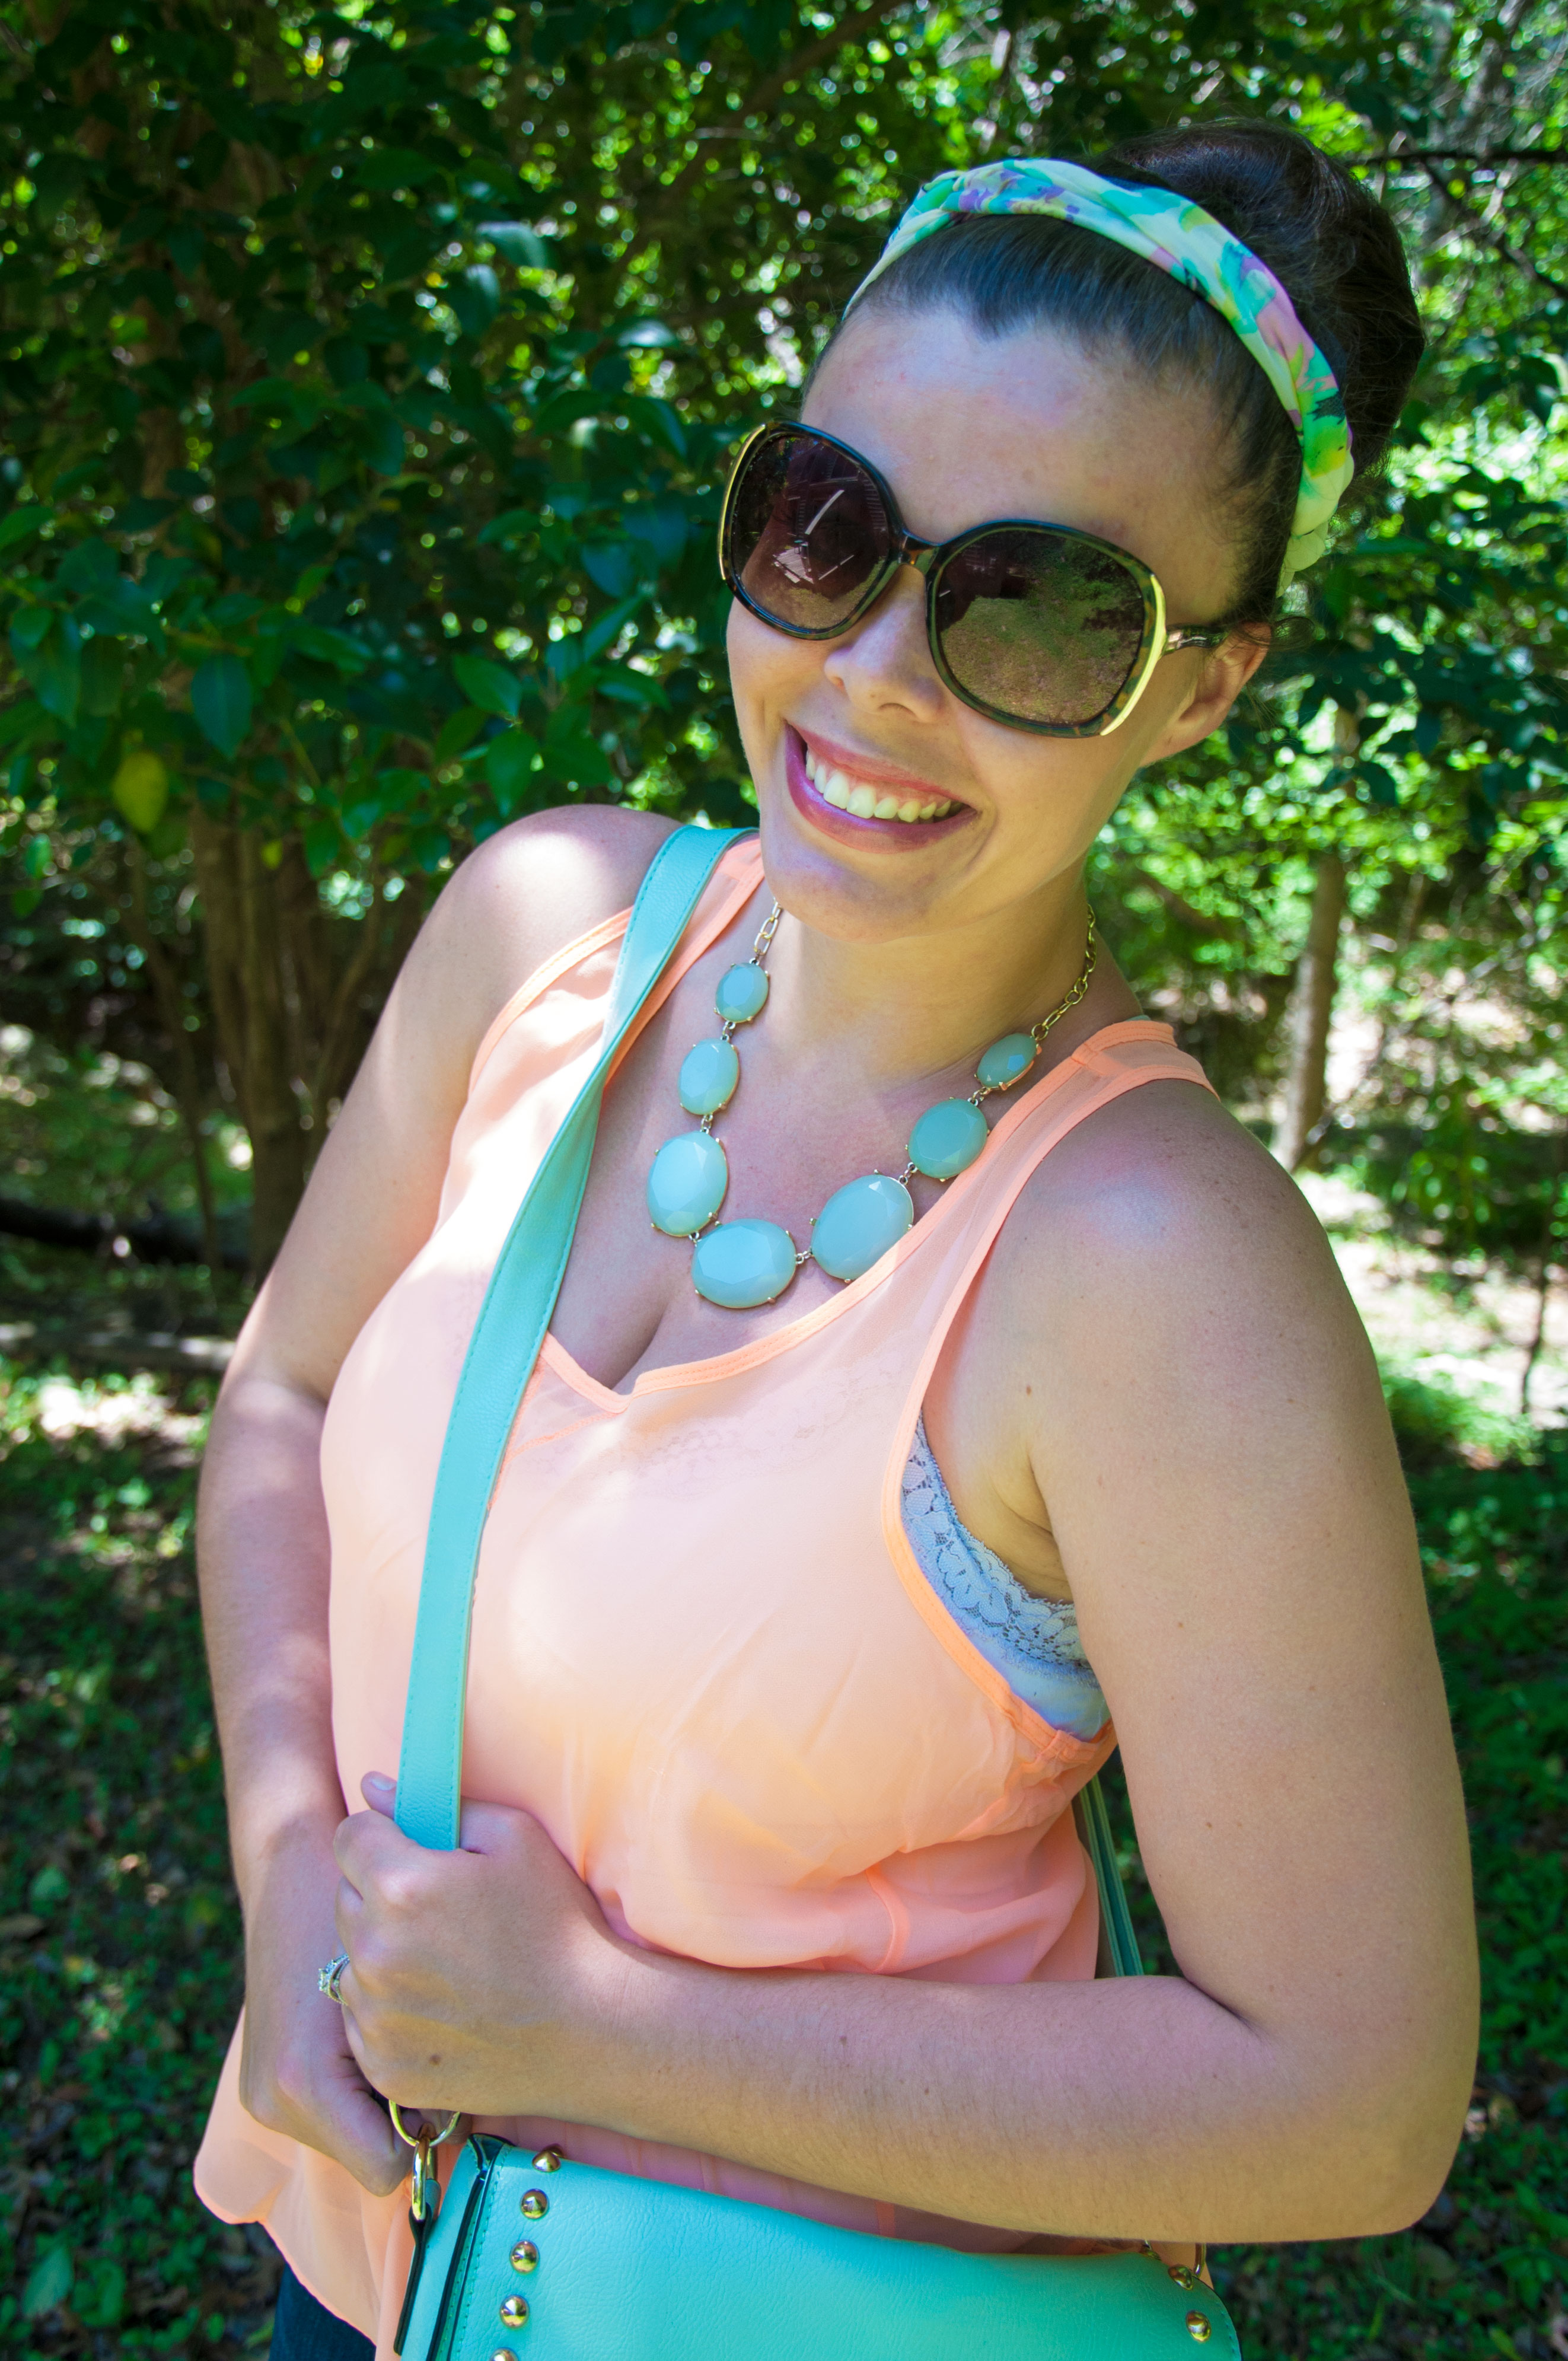 Peach ruffle top with mint accessories